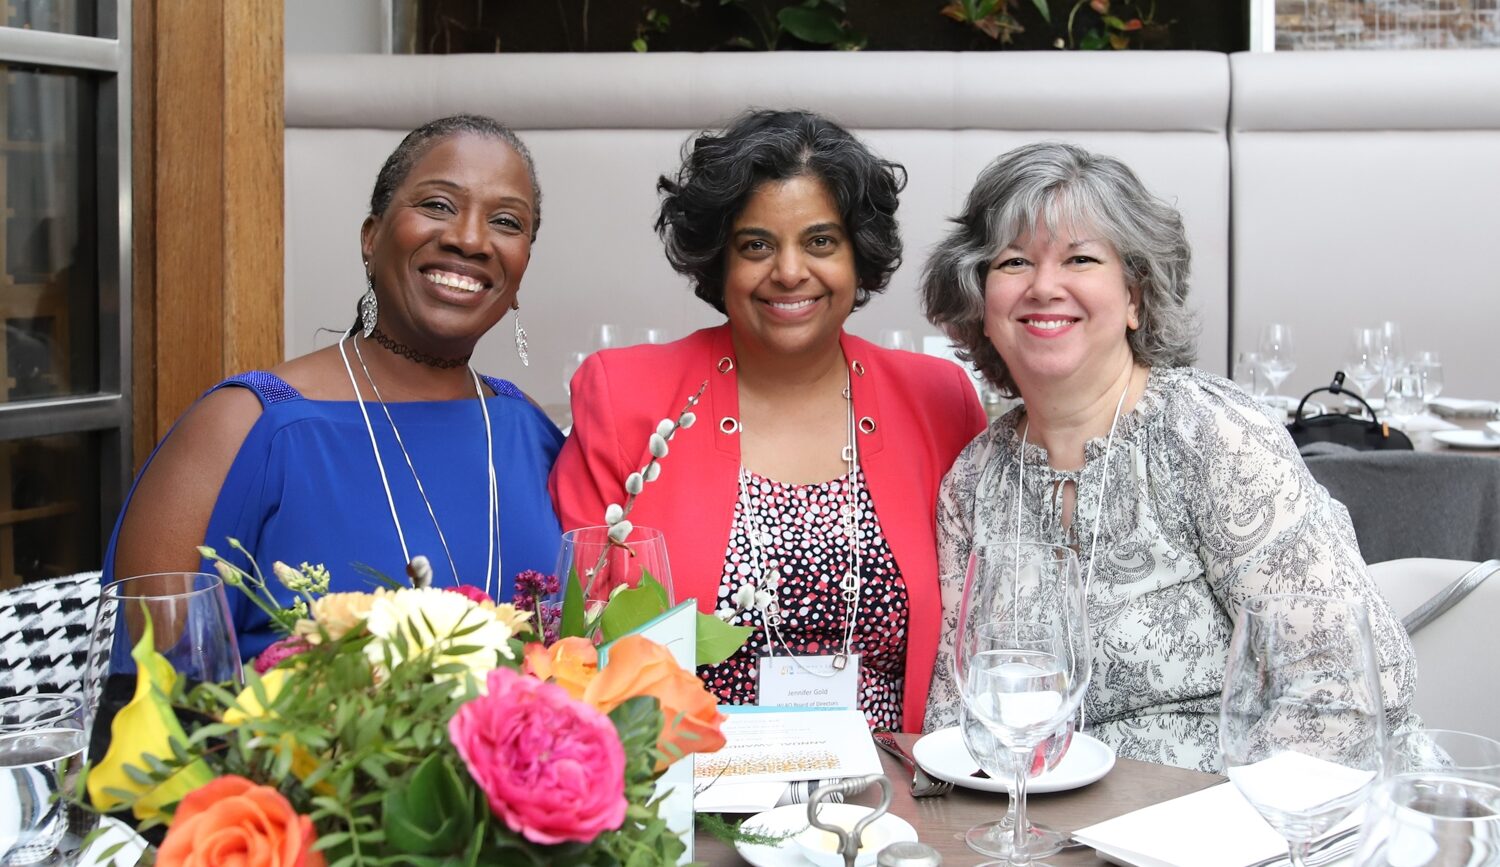 Three members of The WLAO smiling as they pose for a picture over a meal together.